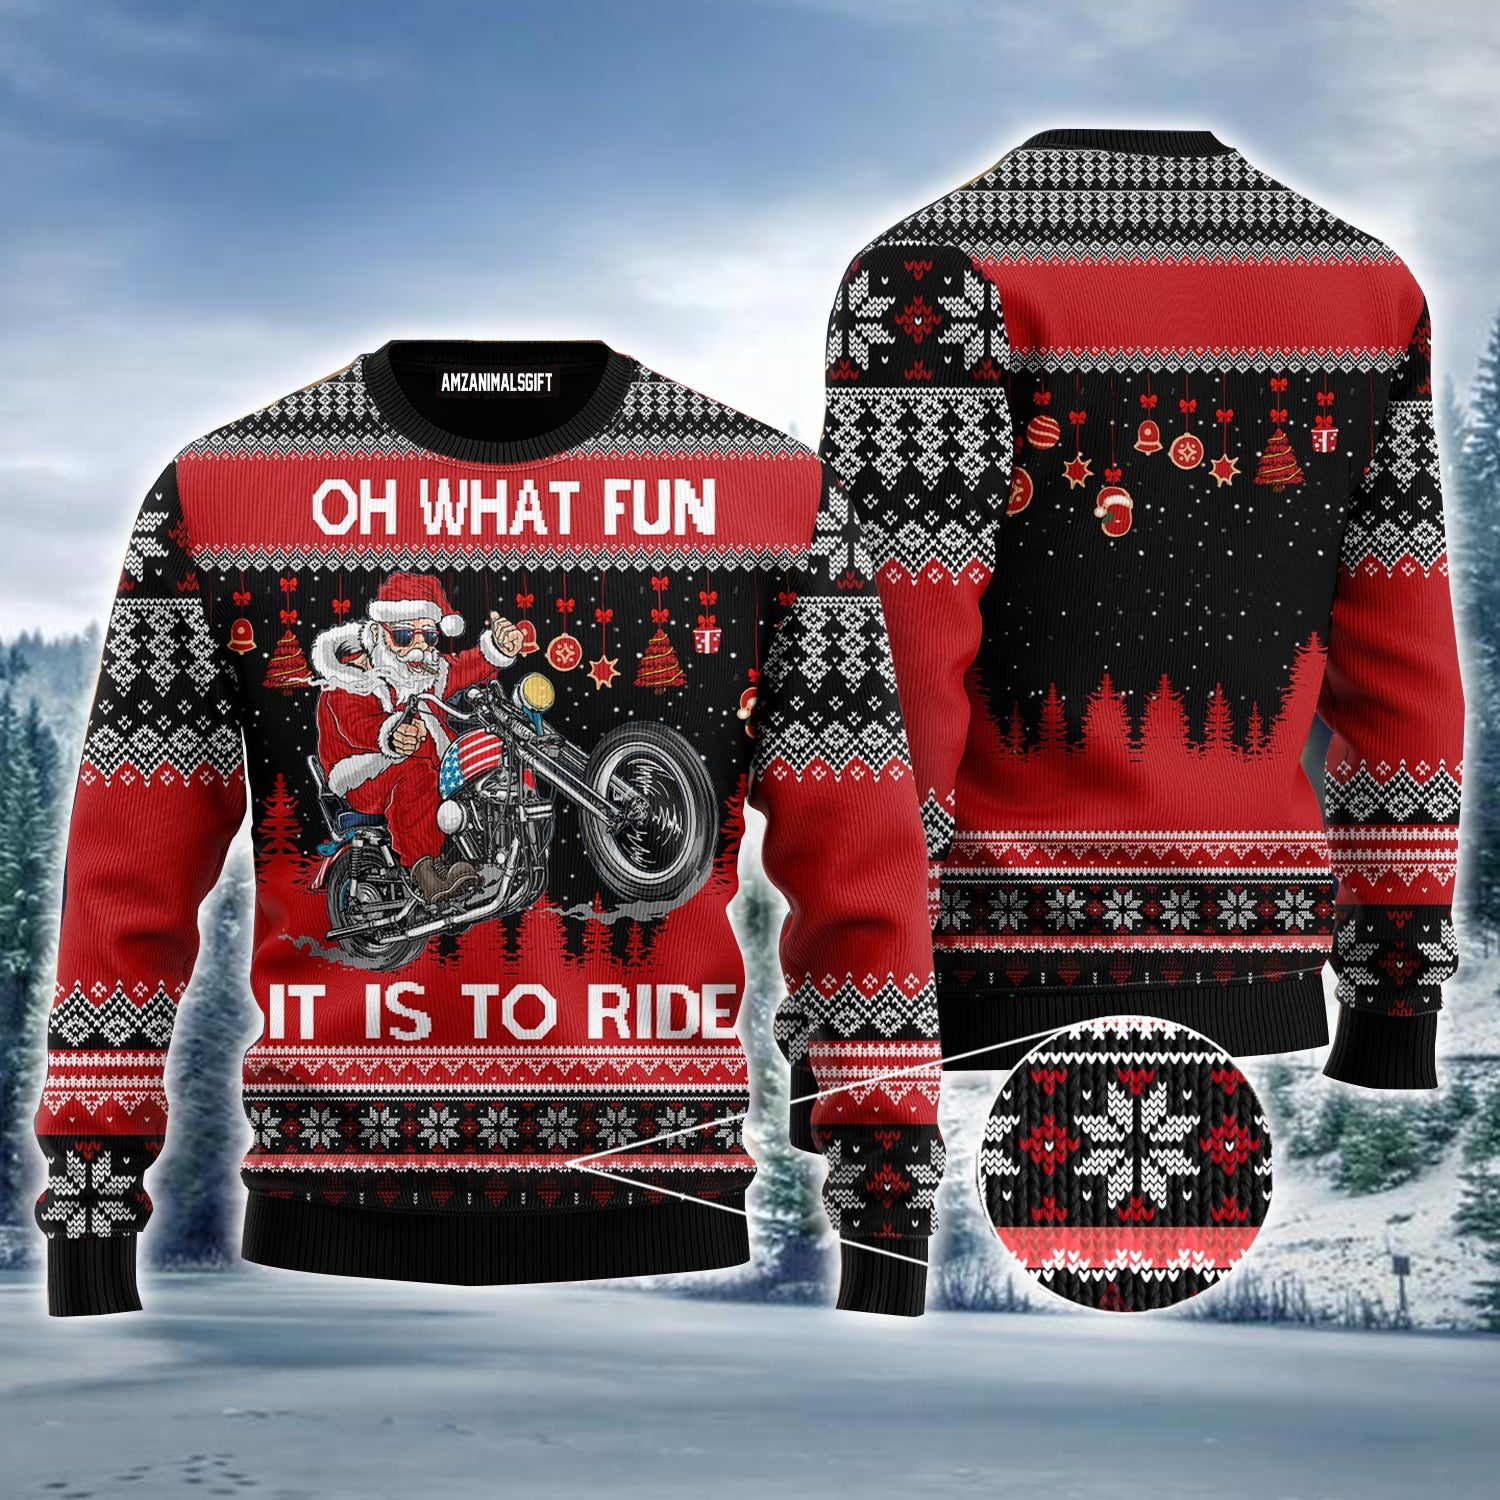 Biker Motorcycle Lover Xmas Ugly Sweater, Christmas Ugly Sweater, Santa Claus Ugly Sweater For Men & Women - Perfect Gift For Christmas, Family